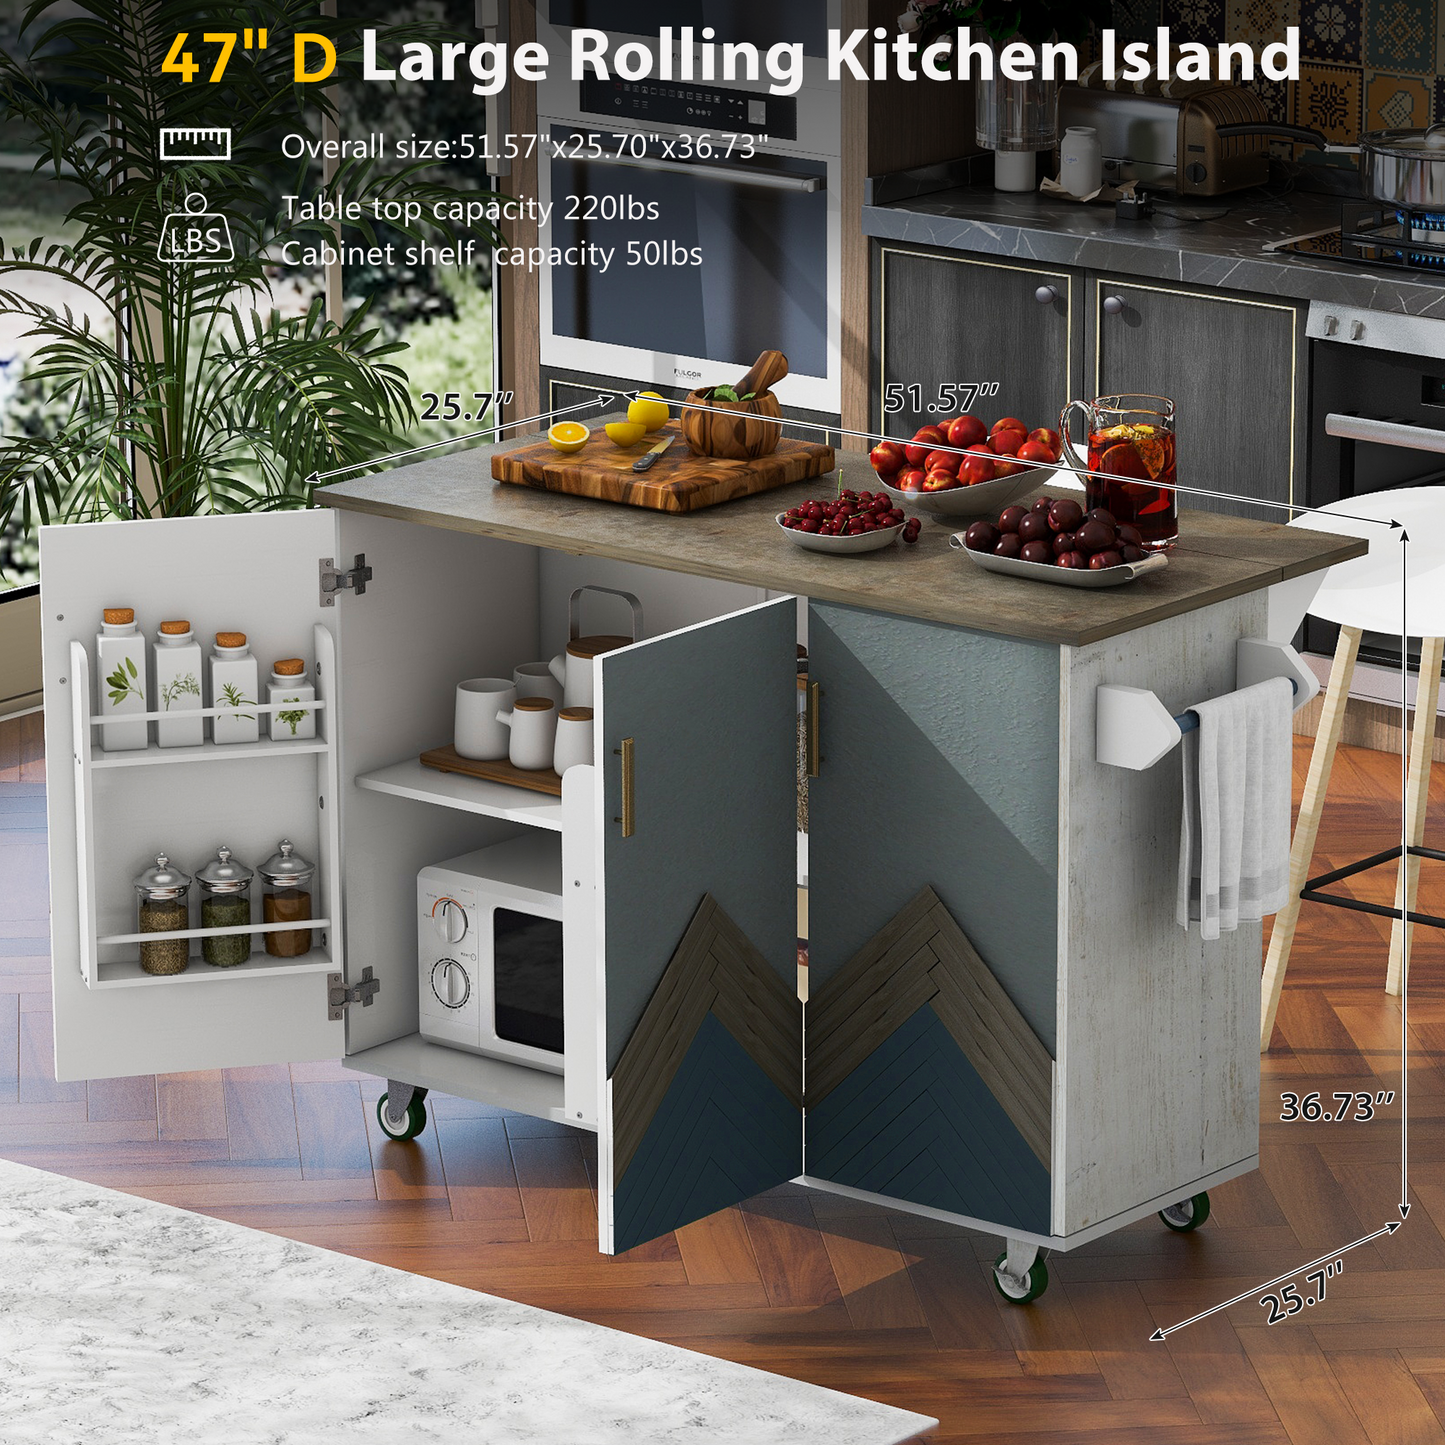 Retro Mountain Wood 47"D Kitchen Island with Drop Leaf, Farmhouse Kitchen Island on Wheels with Internal Storage Rack, Rolling Kitchen Cart with Towel Rack for Living Room, Kitchen, Dining Room(White)